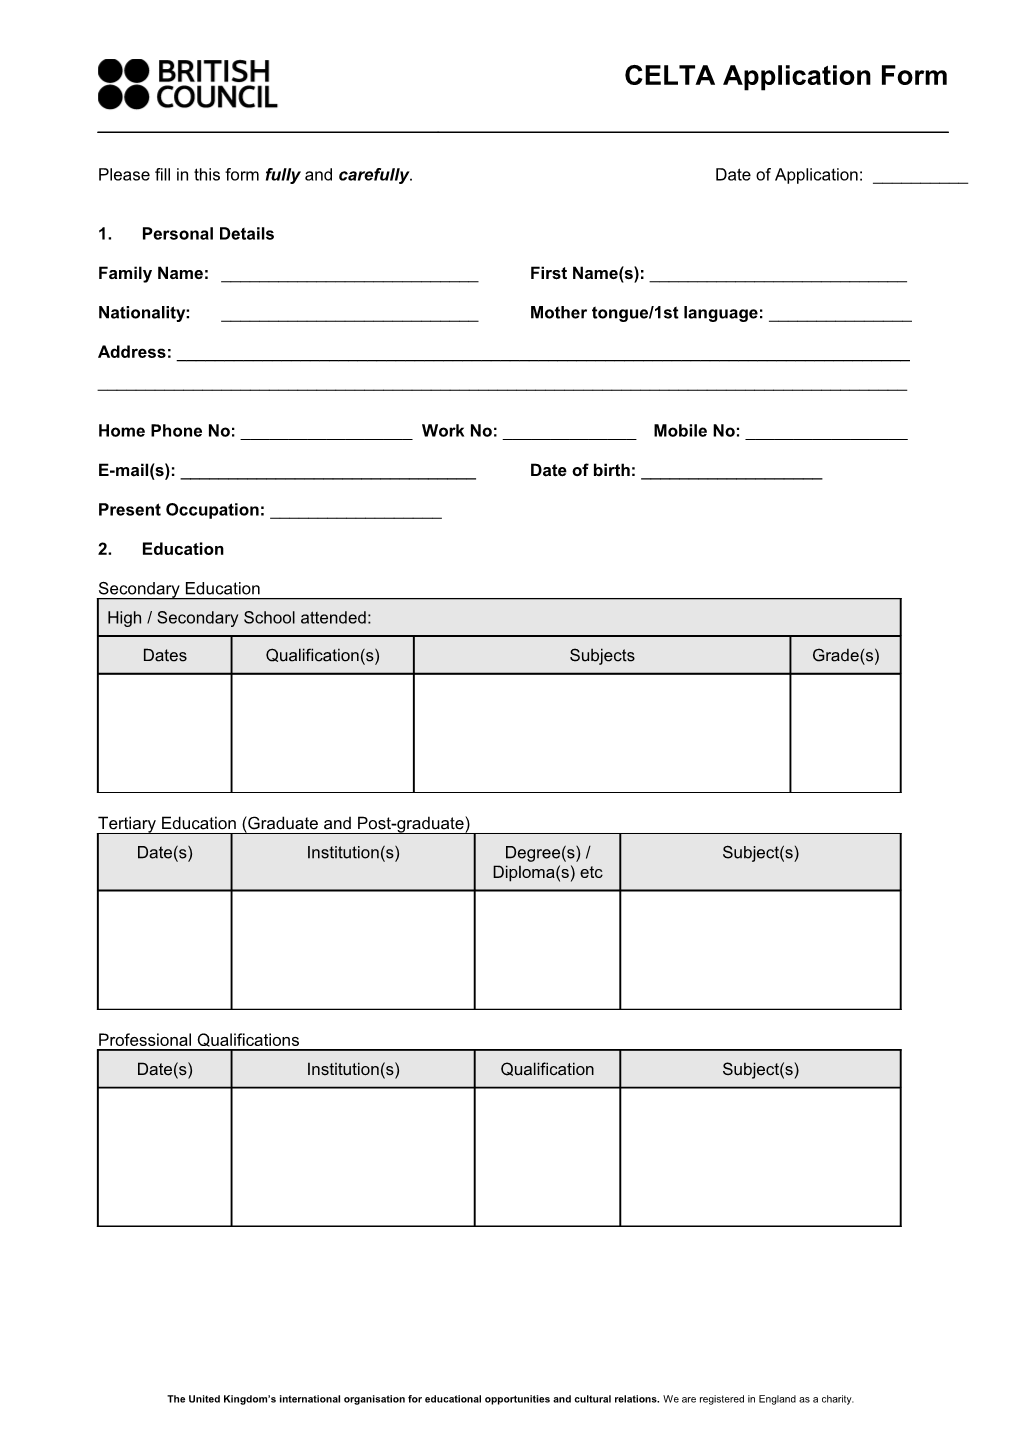 Please Fill in This Form Fully and Carefully .Date of Application: ______